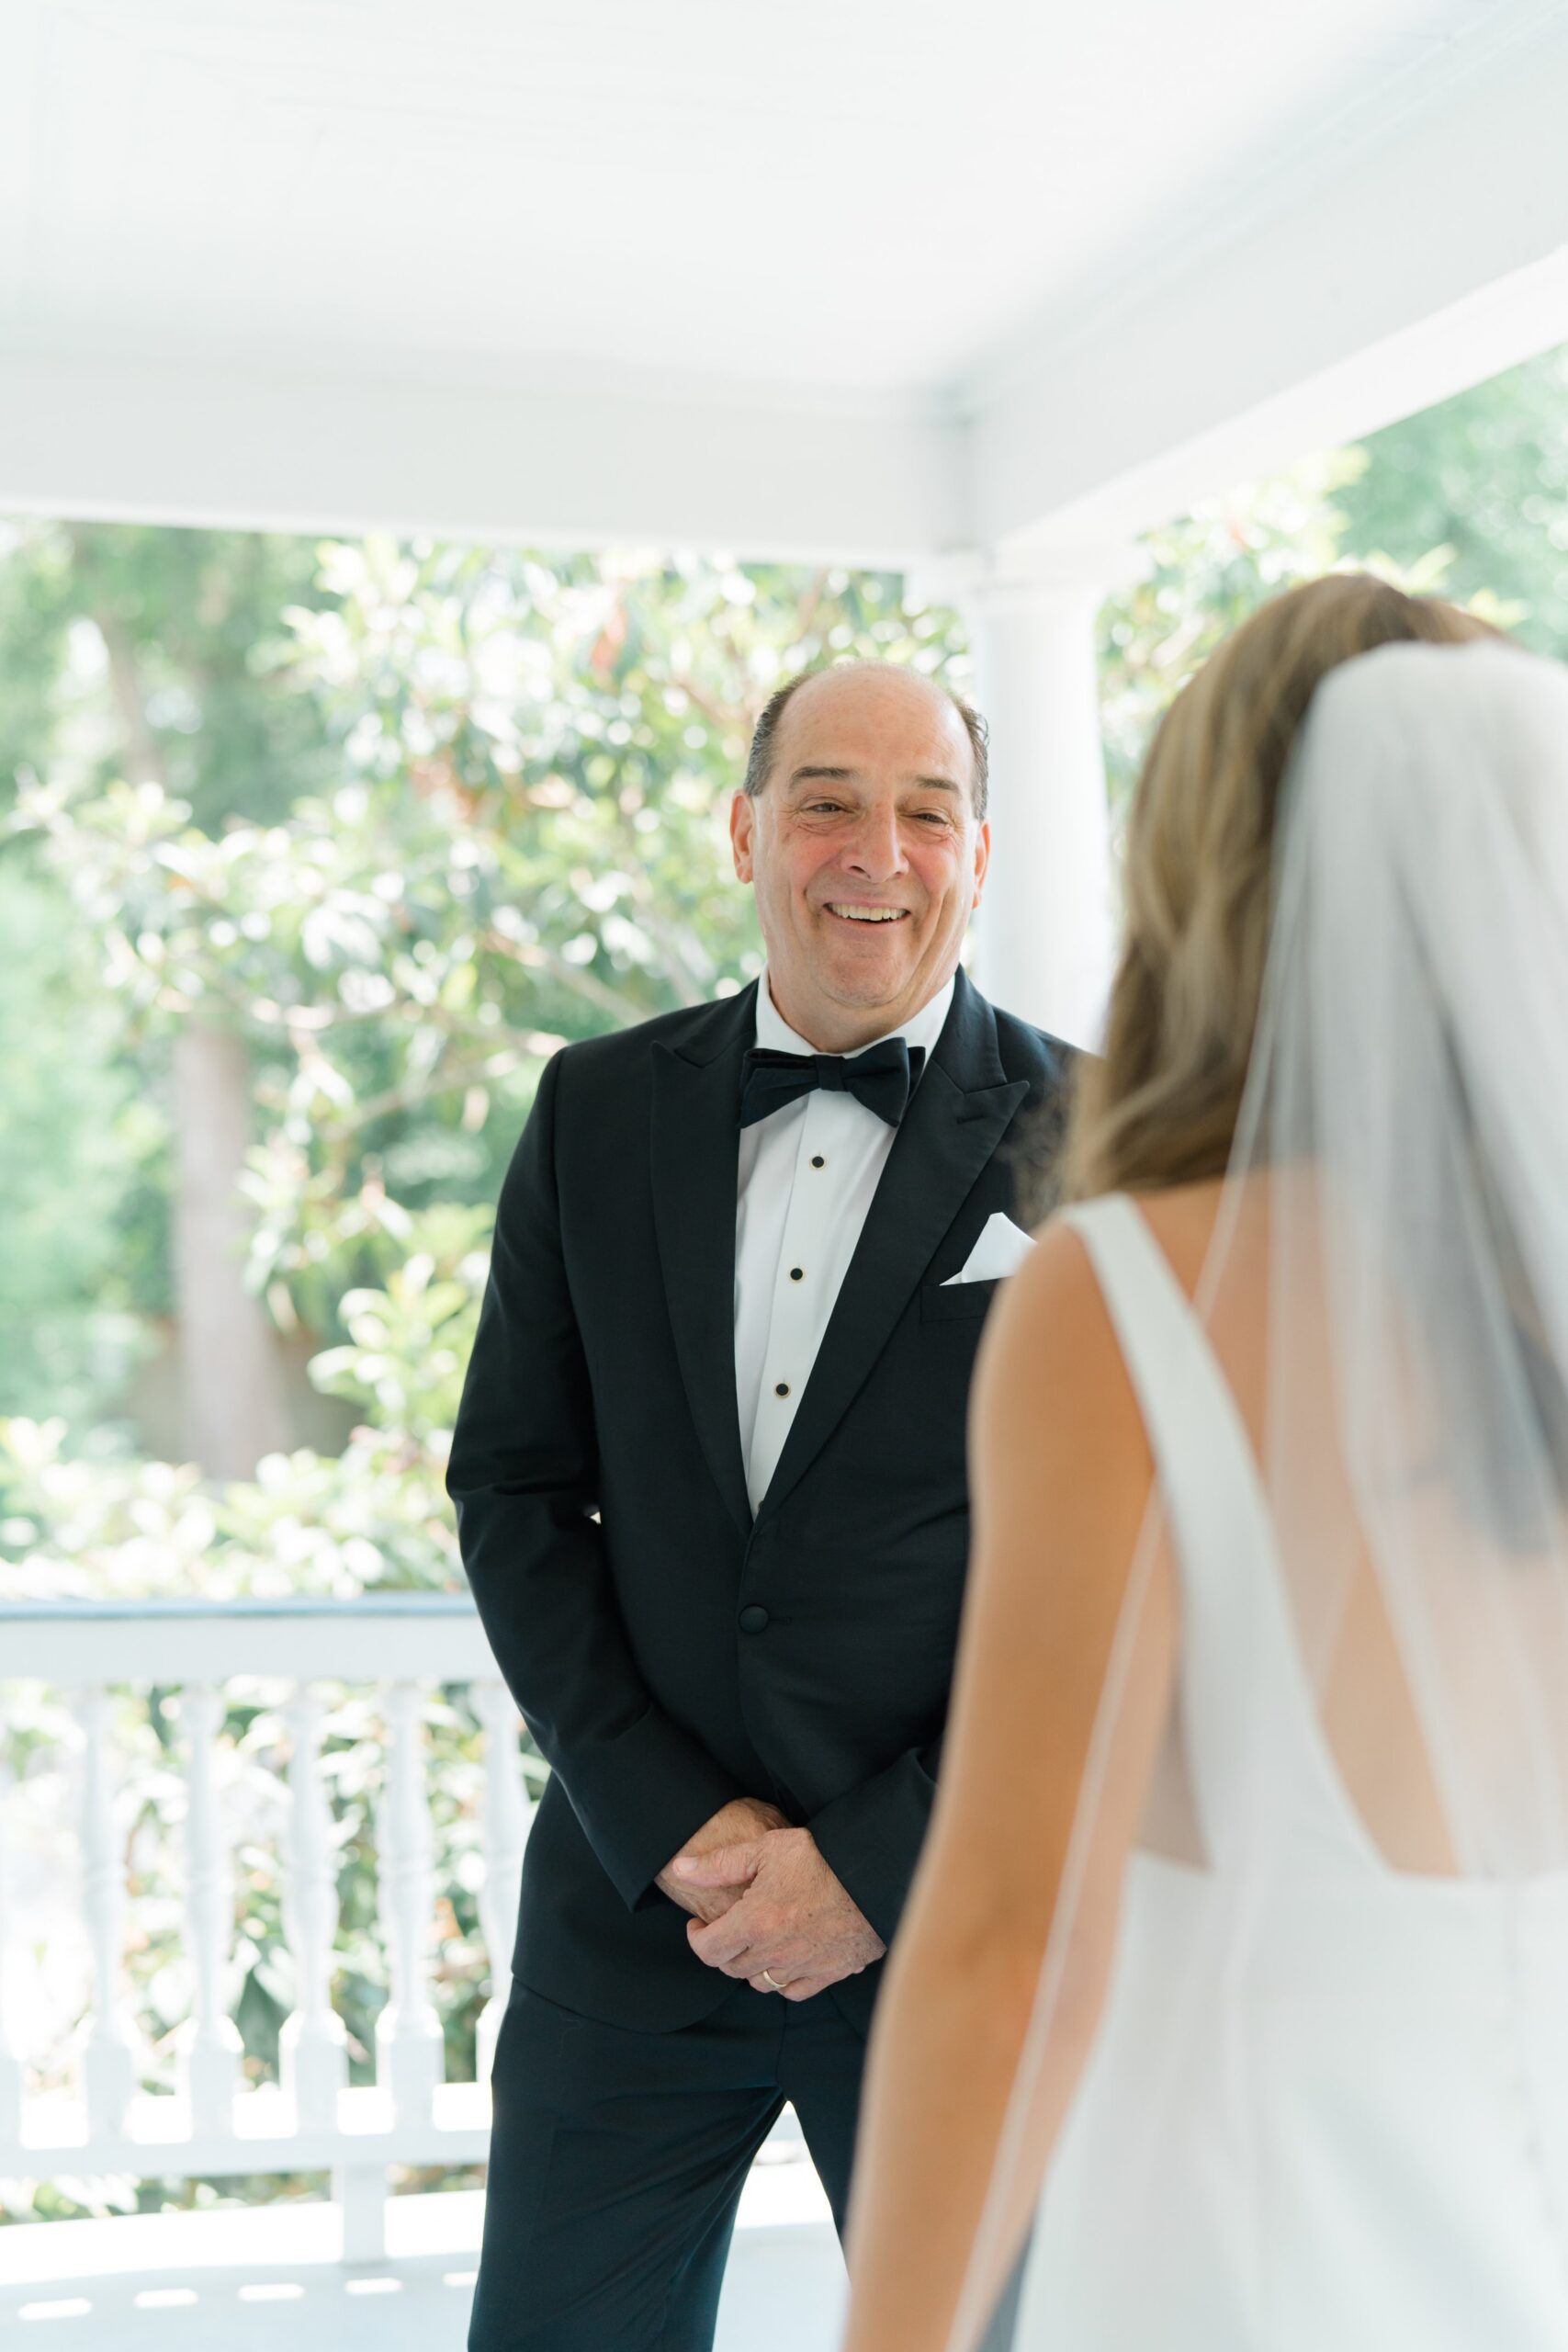 Dad sees his daughter for the first time on her wedding day.